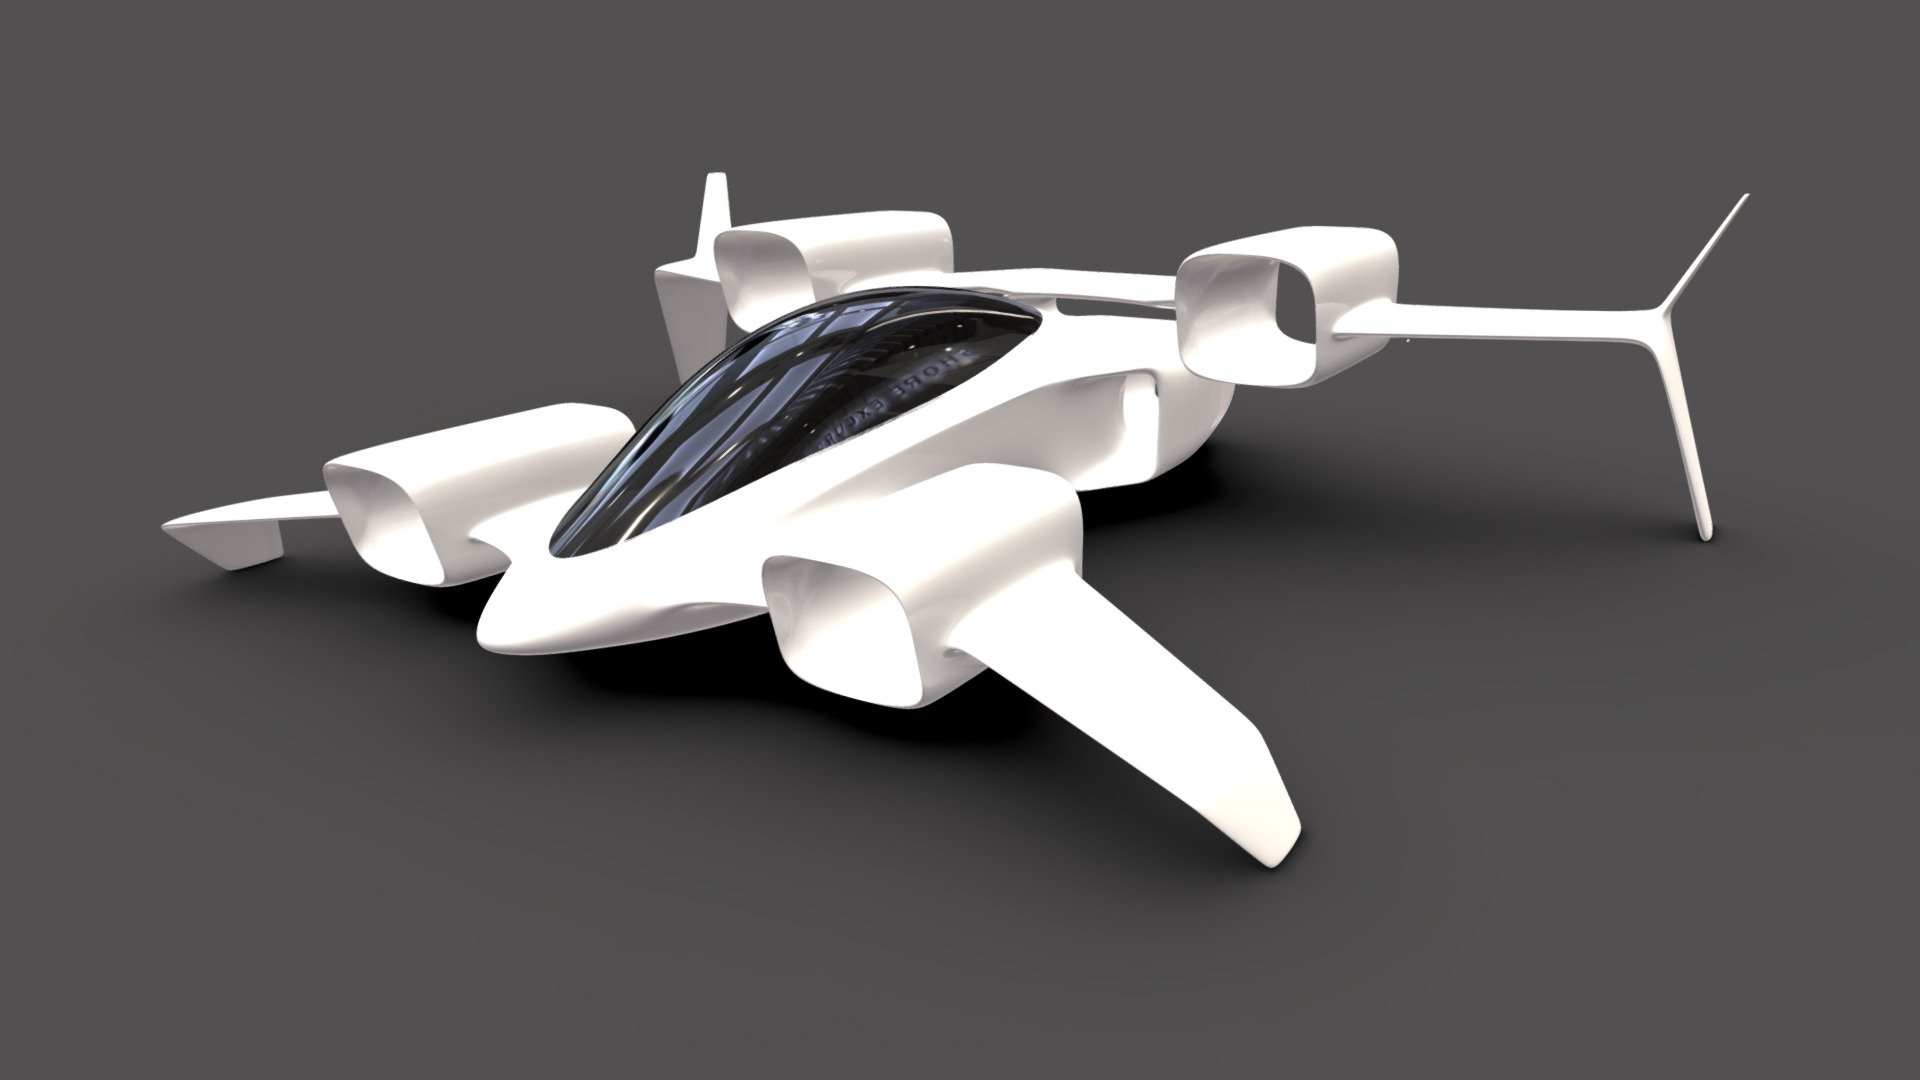 The ML is a GRUG GROUP one seater concept where 6 thrusters (2 embedded and 4 external) can be provided with vector thrust mechanis to add vertical flight capabilities to the aircraft.

This model doesnt show power sources and vector thrust mechanism due copyright, just is the model in his basic shape 3d model